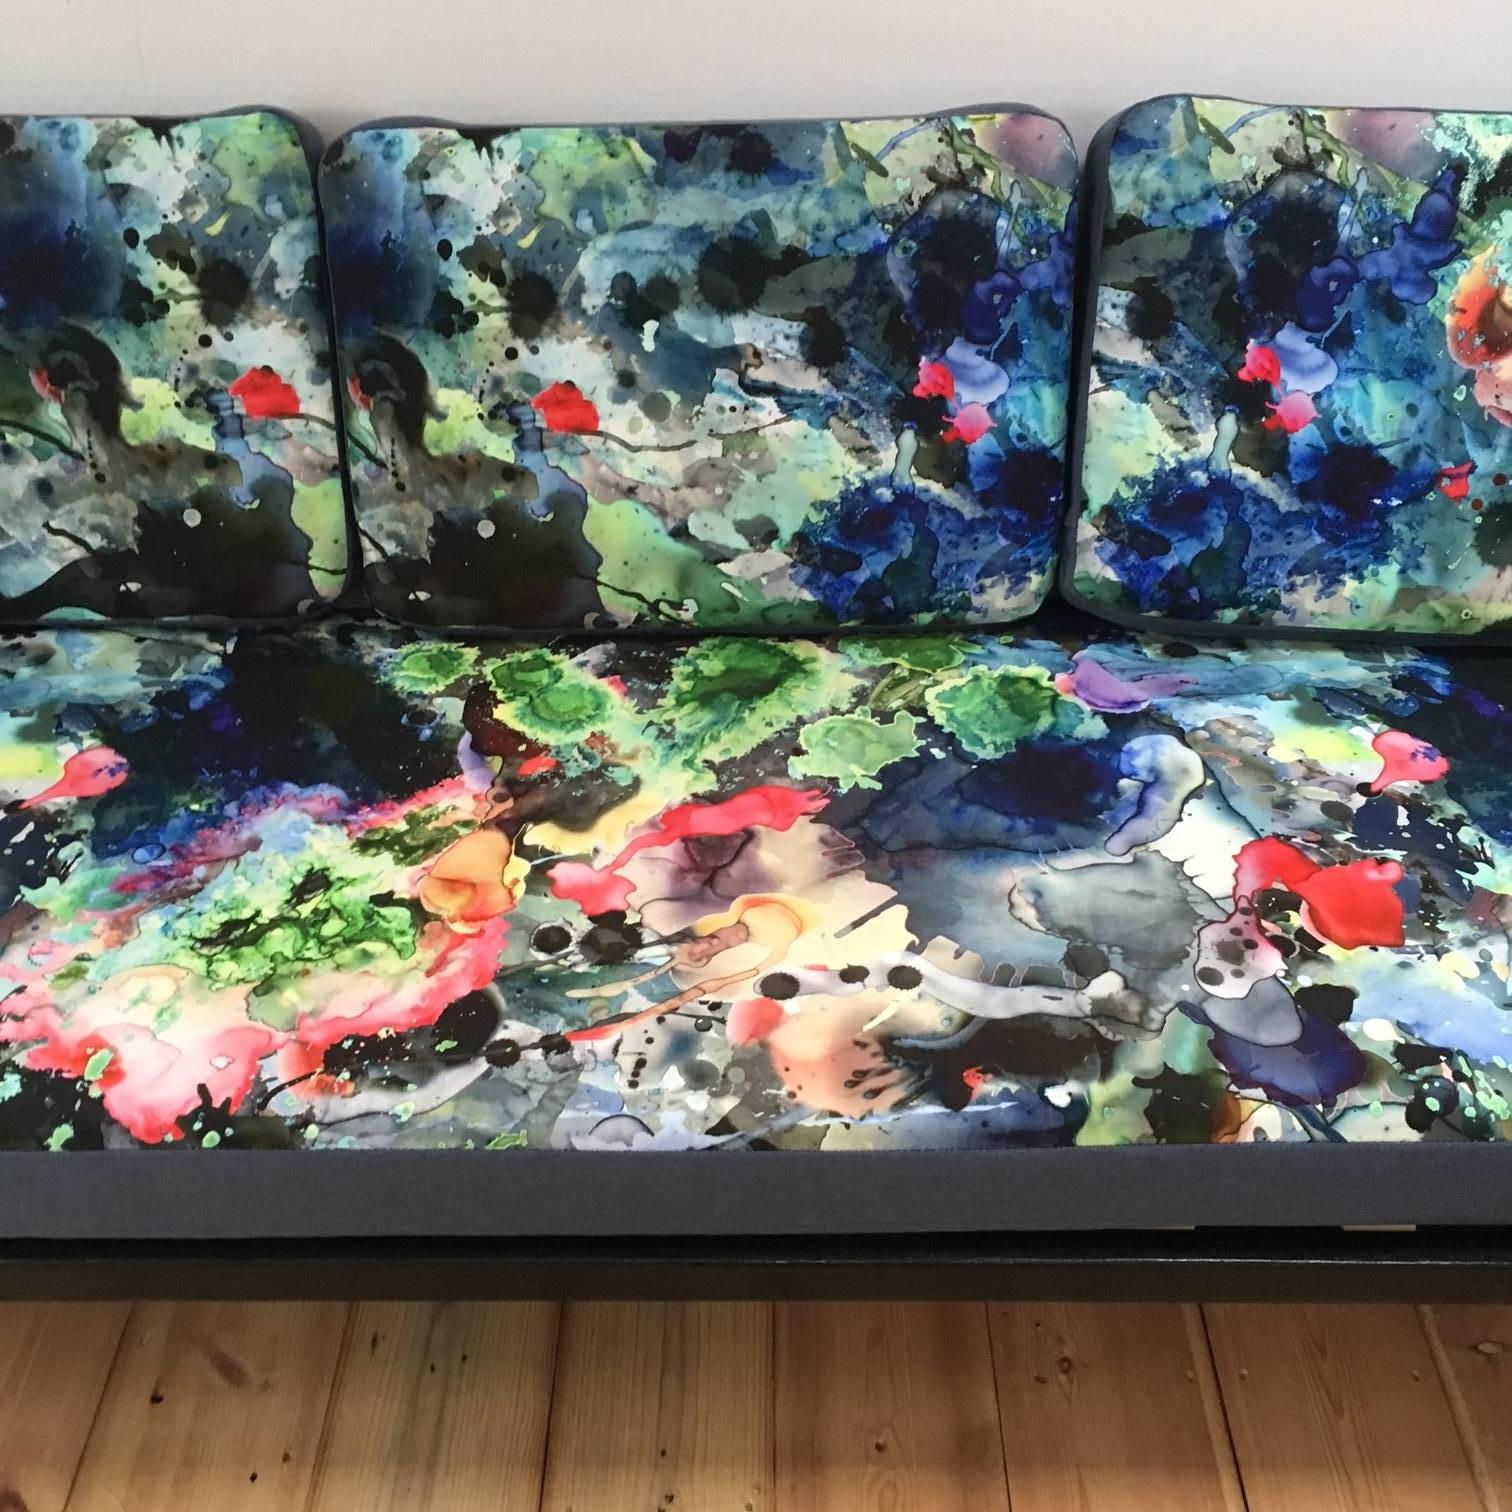 Mid-20th Century Ercol Studio Couch with Timorous Beasties Print Upholstery In Excellent Condition For Sale In Hove, GB